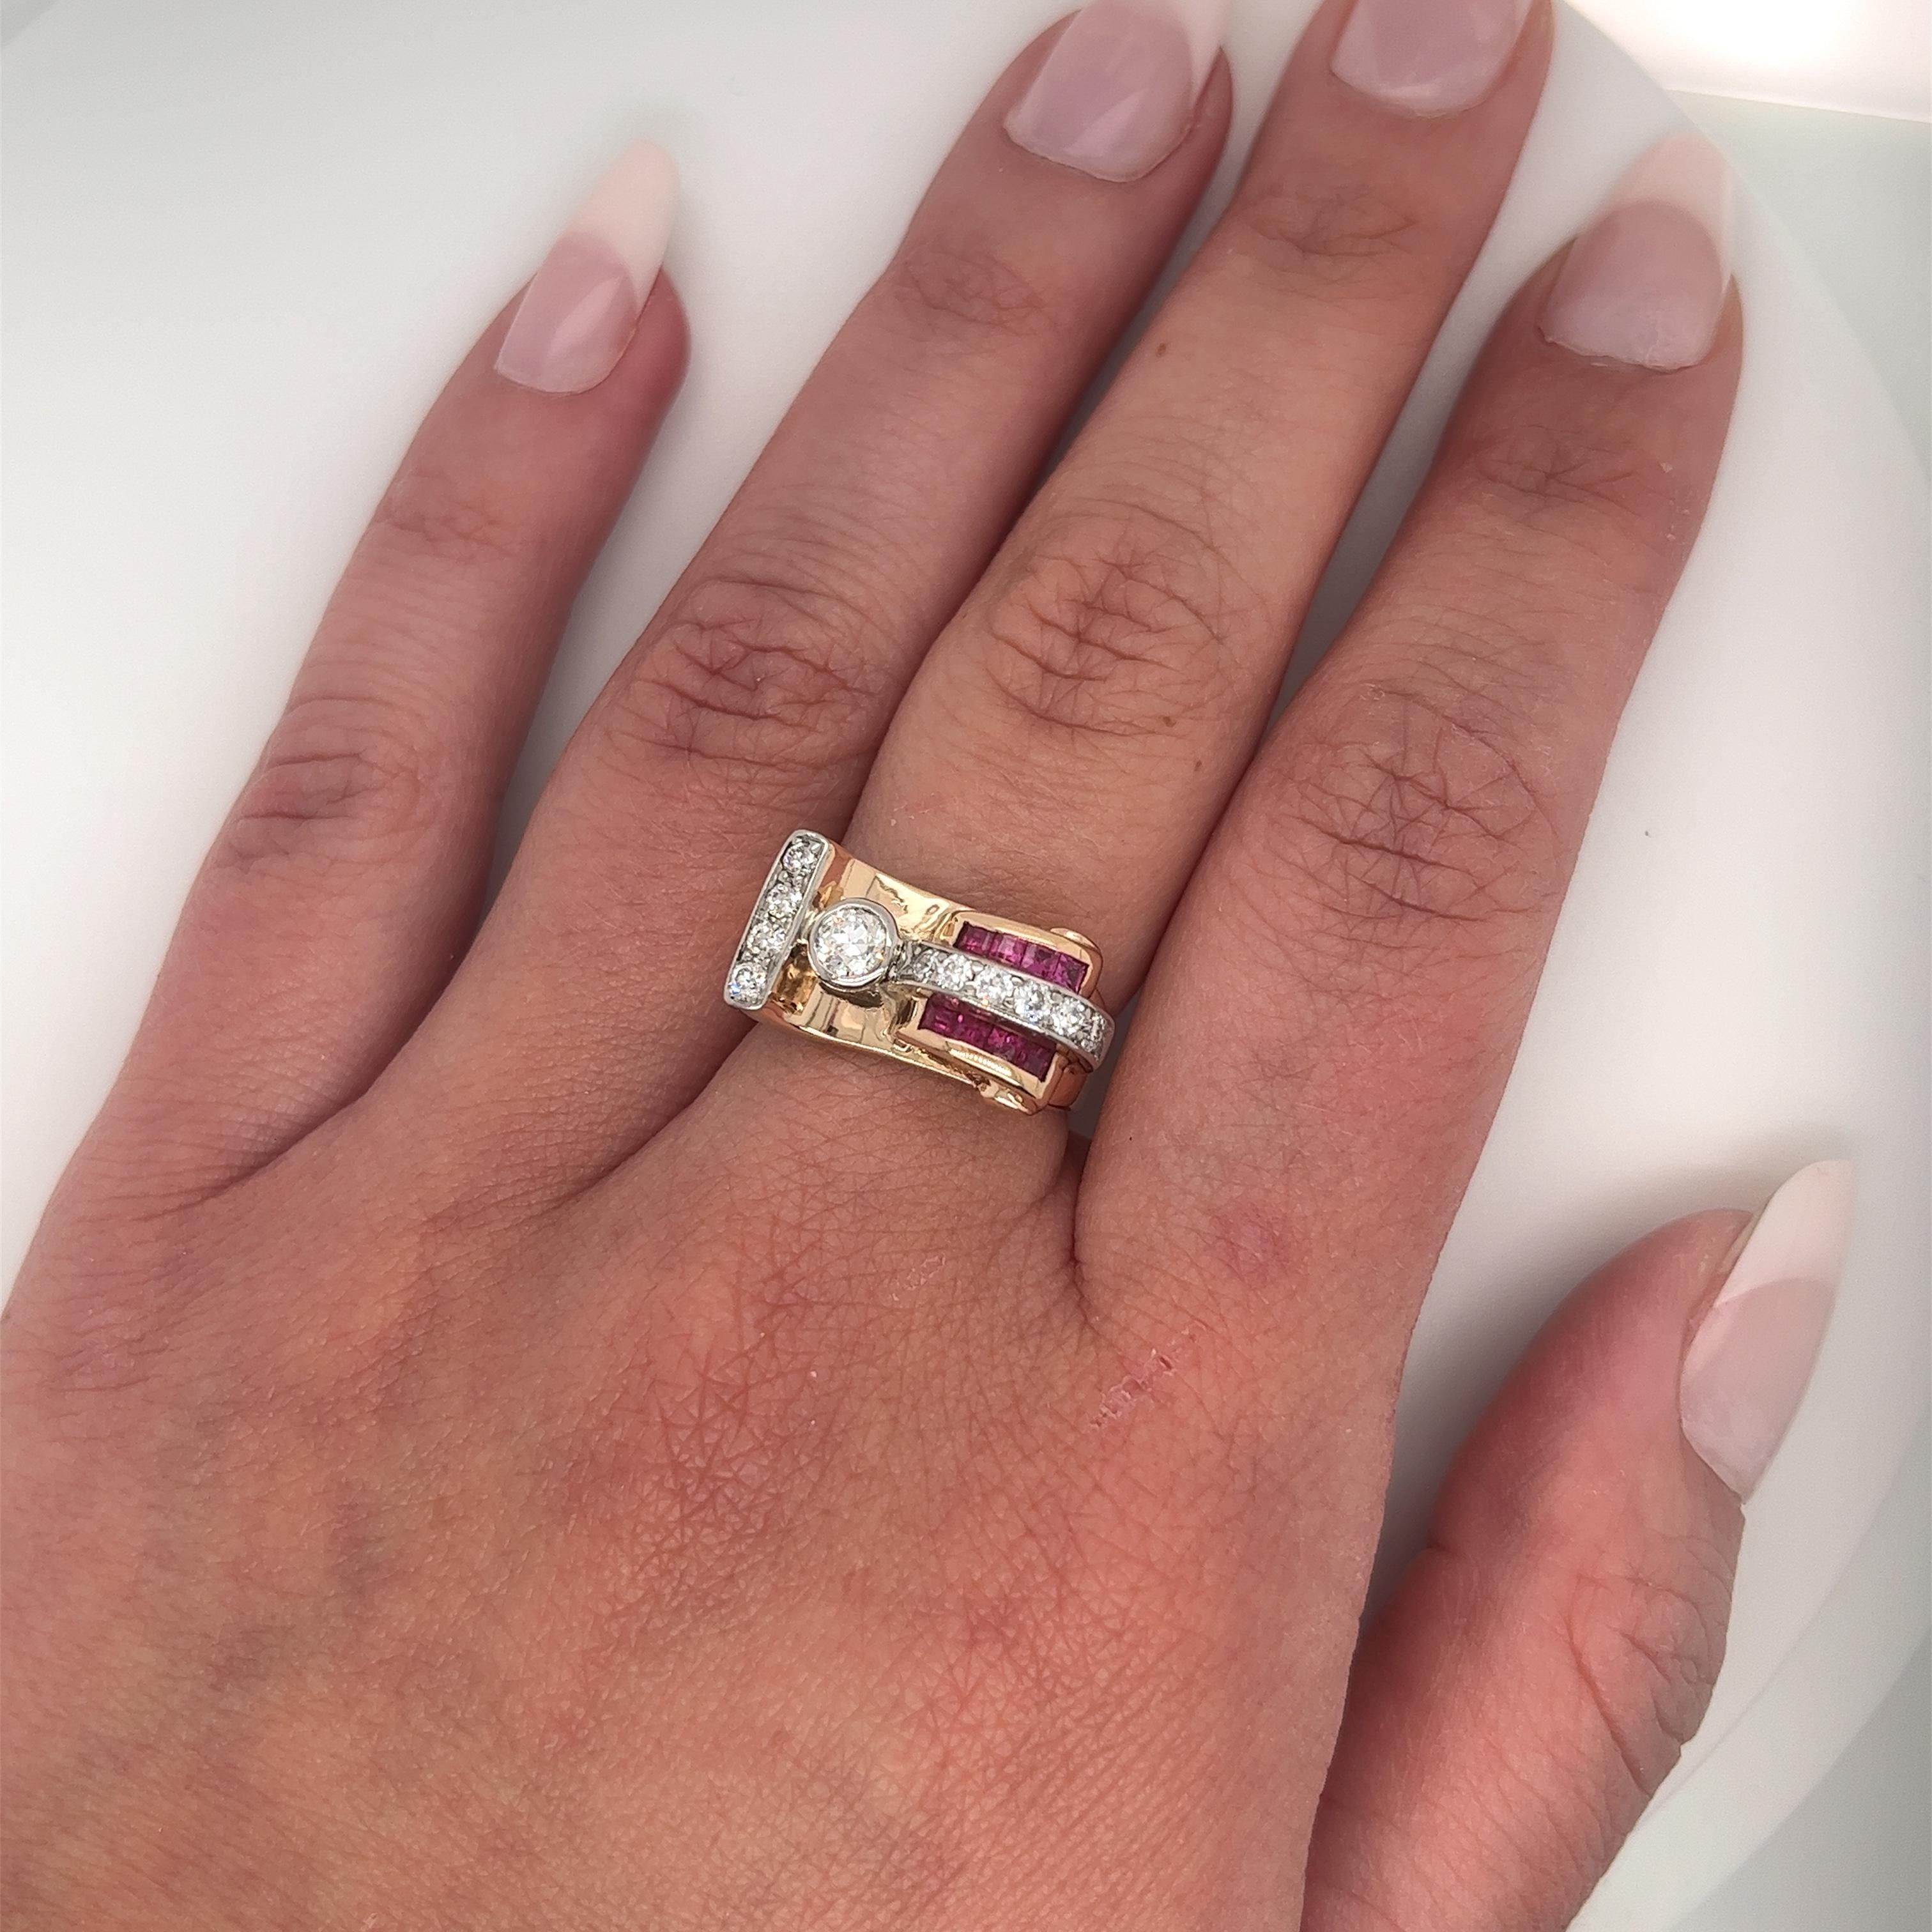 Make your mark, with this retro-style vintage ring. Featuring a curved ring top and a straight shank. Set with natural Old Euro round cut diamonds and baguette cut Rubies. This ring exudes timeless elegance. Set in two-tone 14k solid gold.

Details: